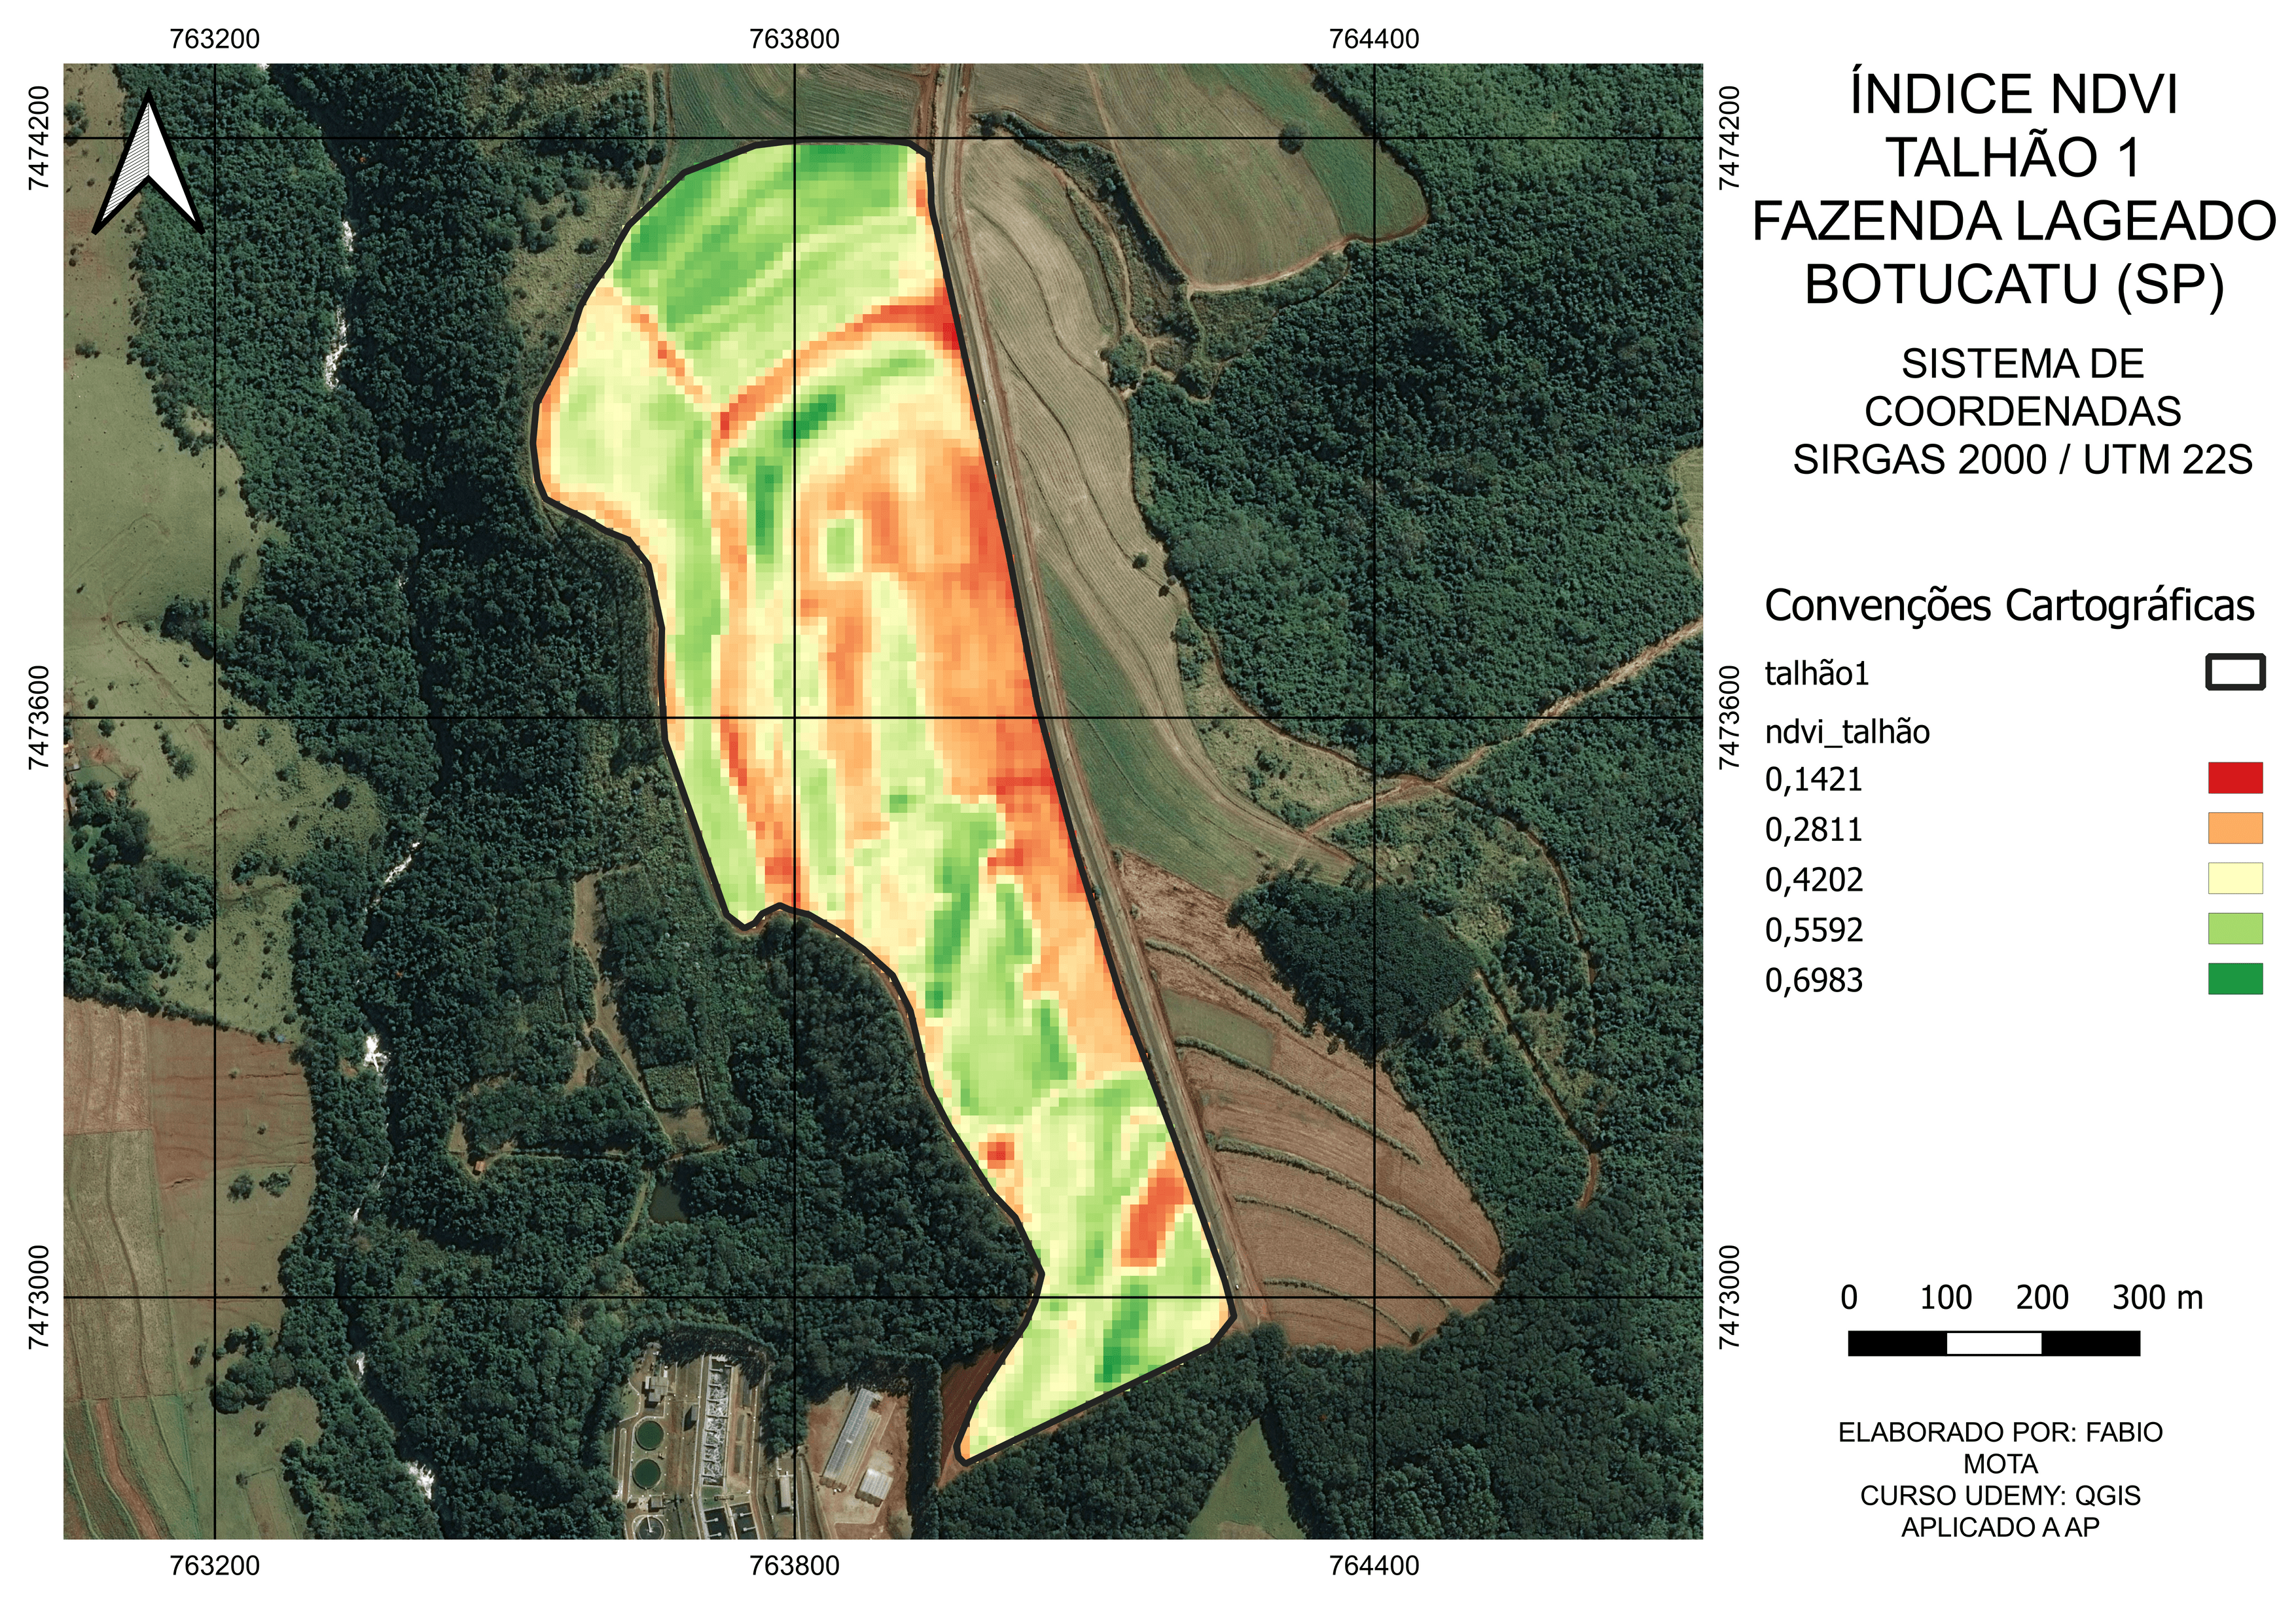 NDVI Map for Agricultural